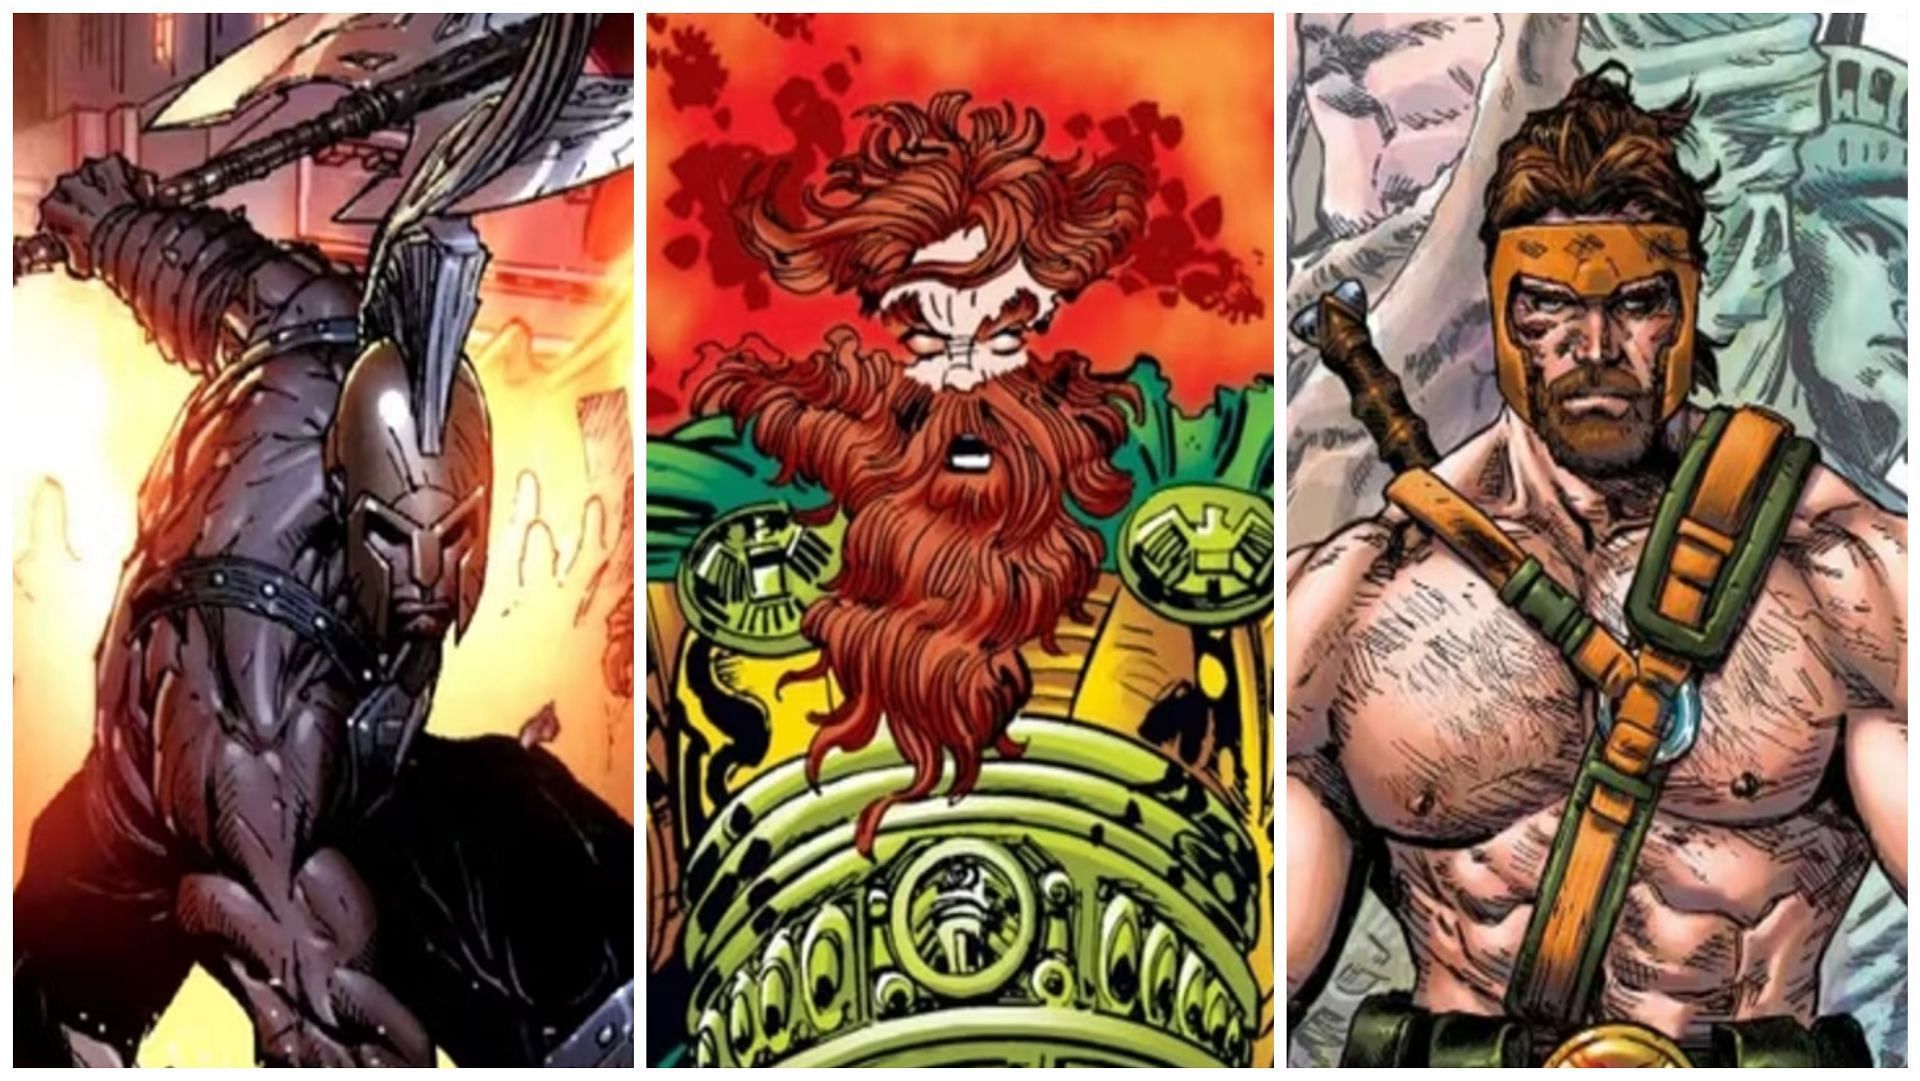 Ares, Zeus, and Hercules from Marvel (Images via Marvel Comics)